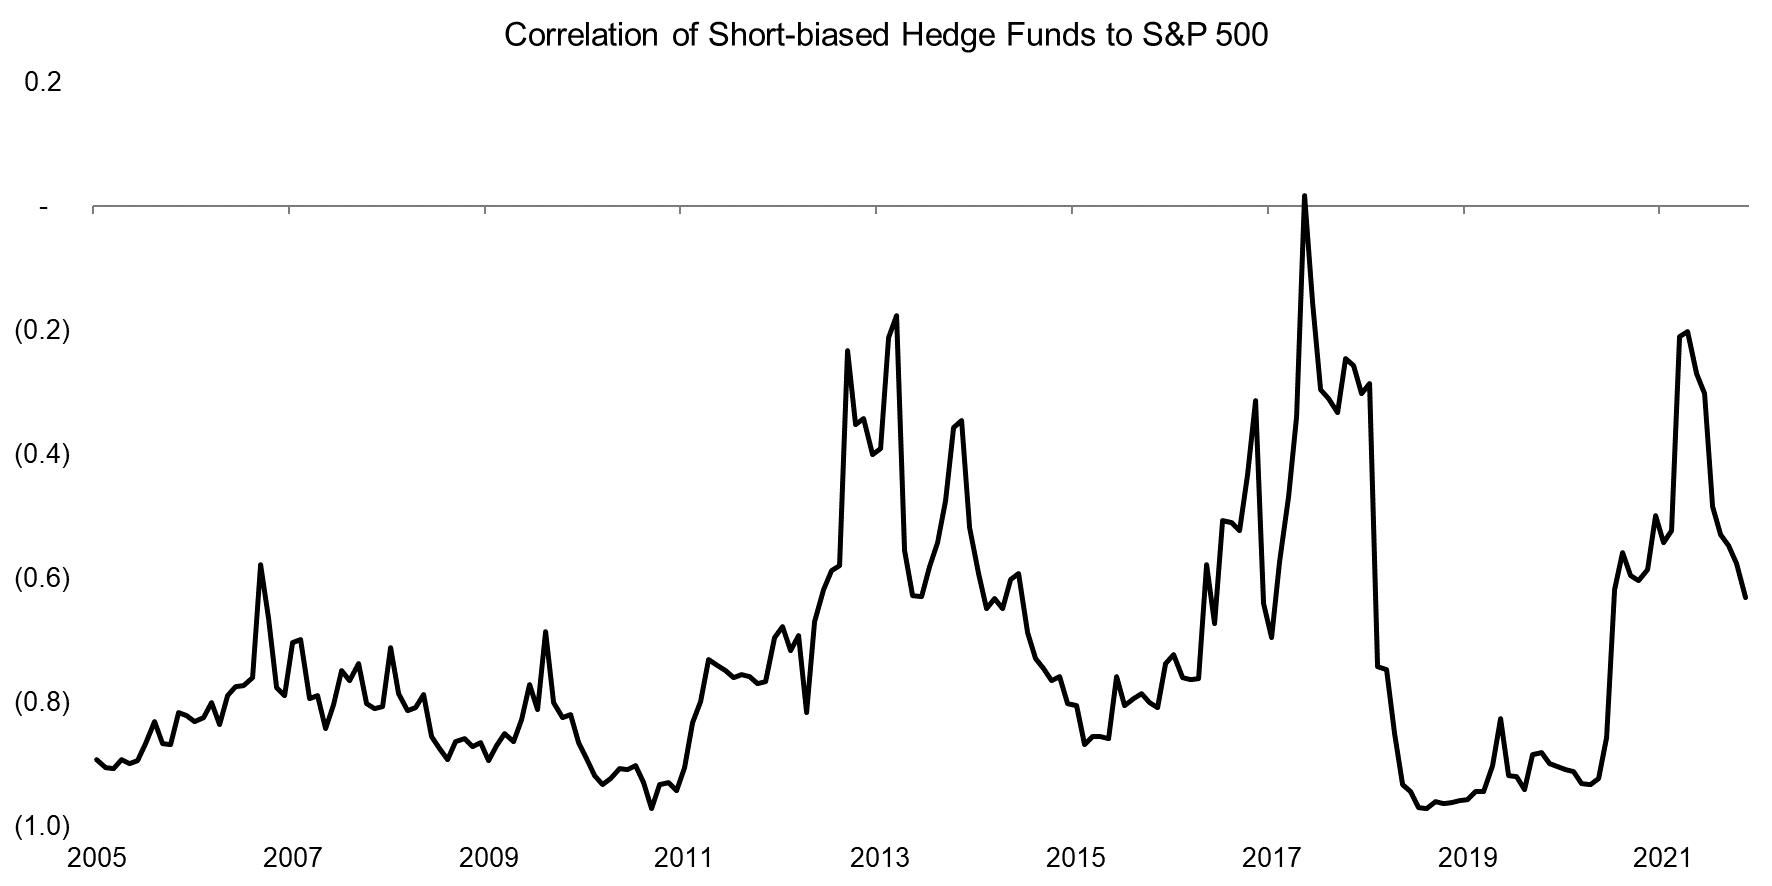 Correlation of Short-biased Hedge Funds to S&P 500